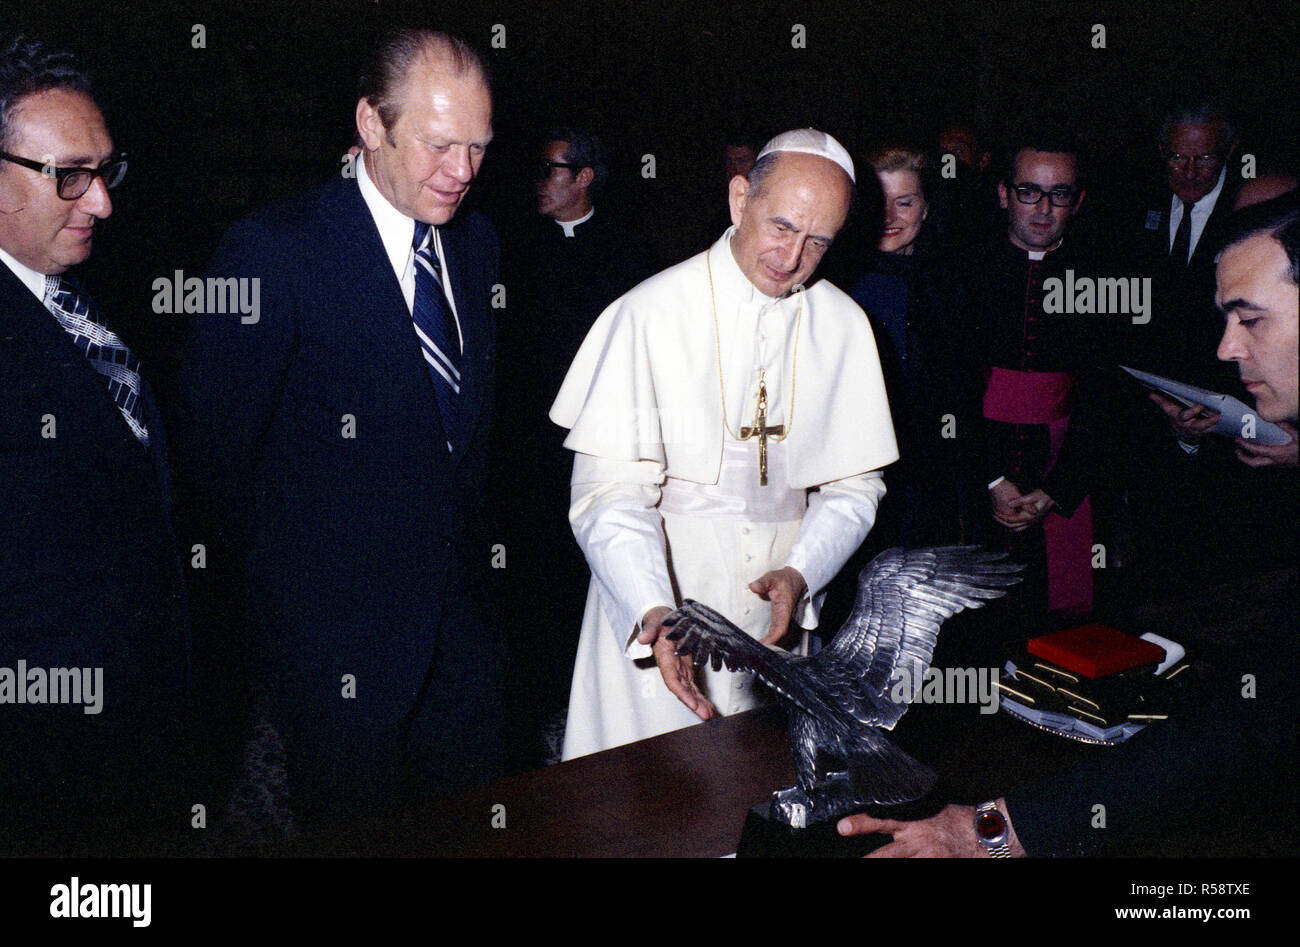 1975-june-3-ponitifical-residence-the-vatican-city-rome-italy-gerald-r-ford-pope-paul-vi-betty-ford-henry-kissinger-looking-at-silver-eagle-trip-to-italy-visit-with-his-holiness-pope-paul-vi-R58TXE.jpg